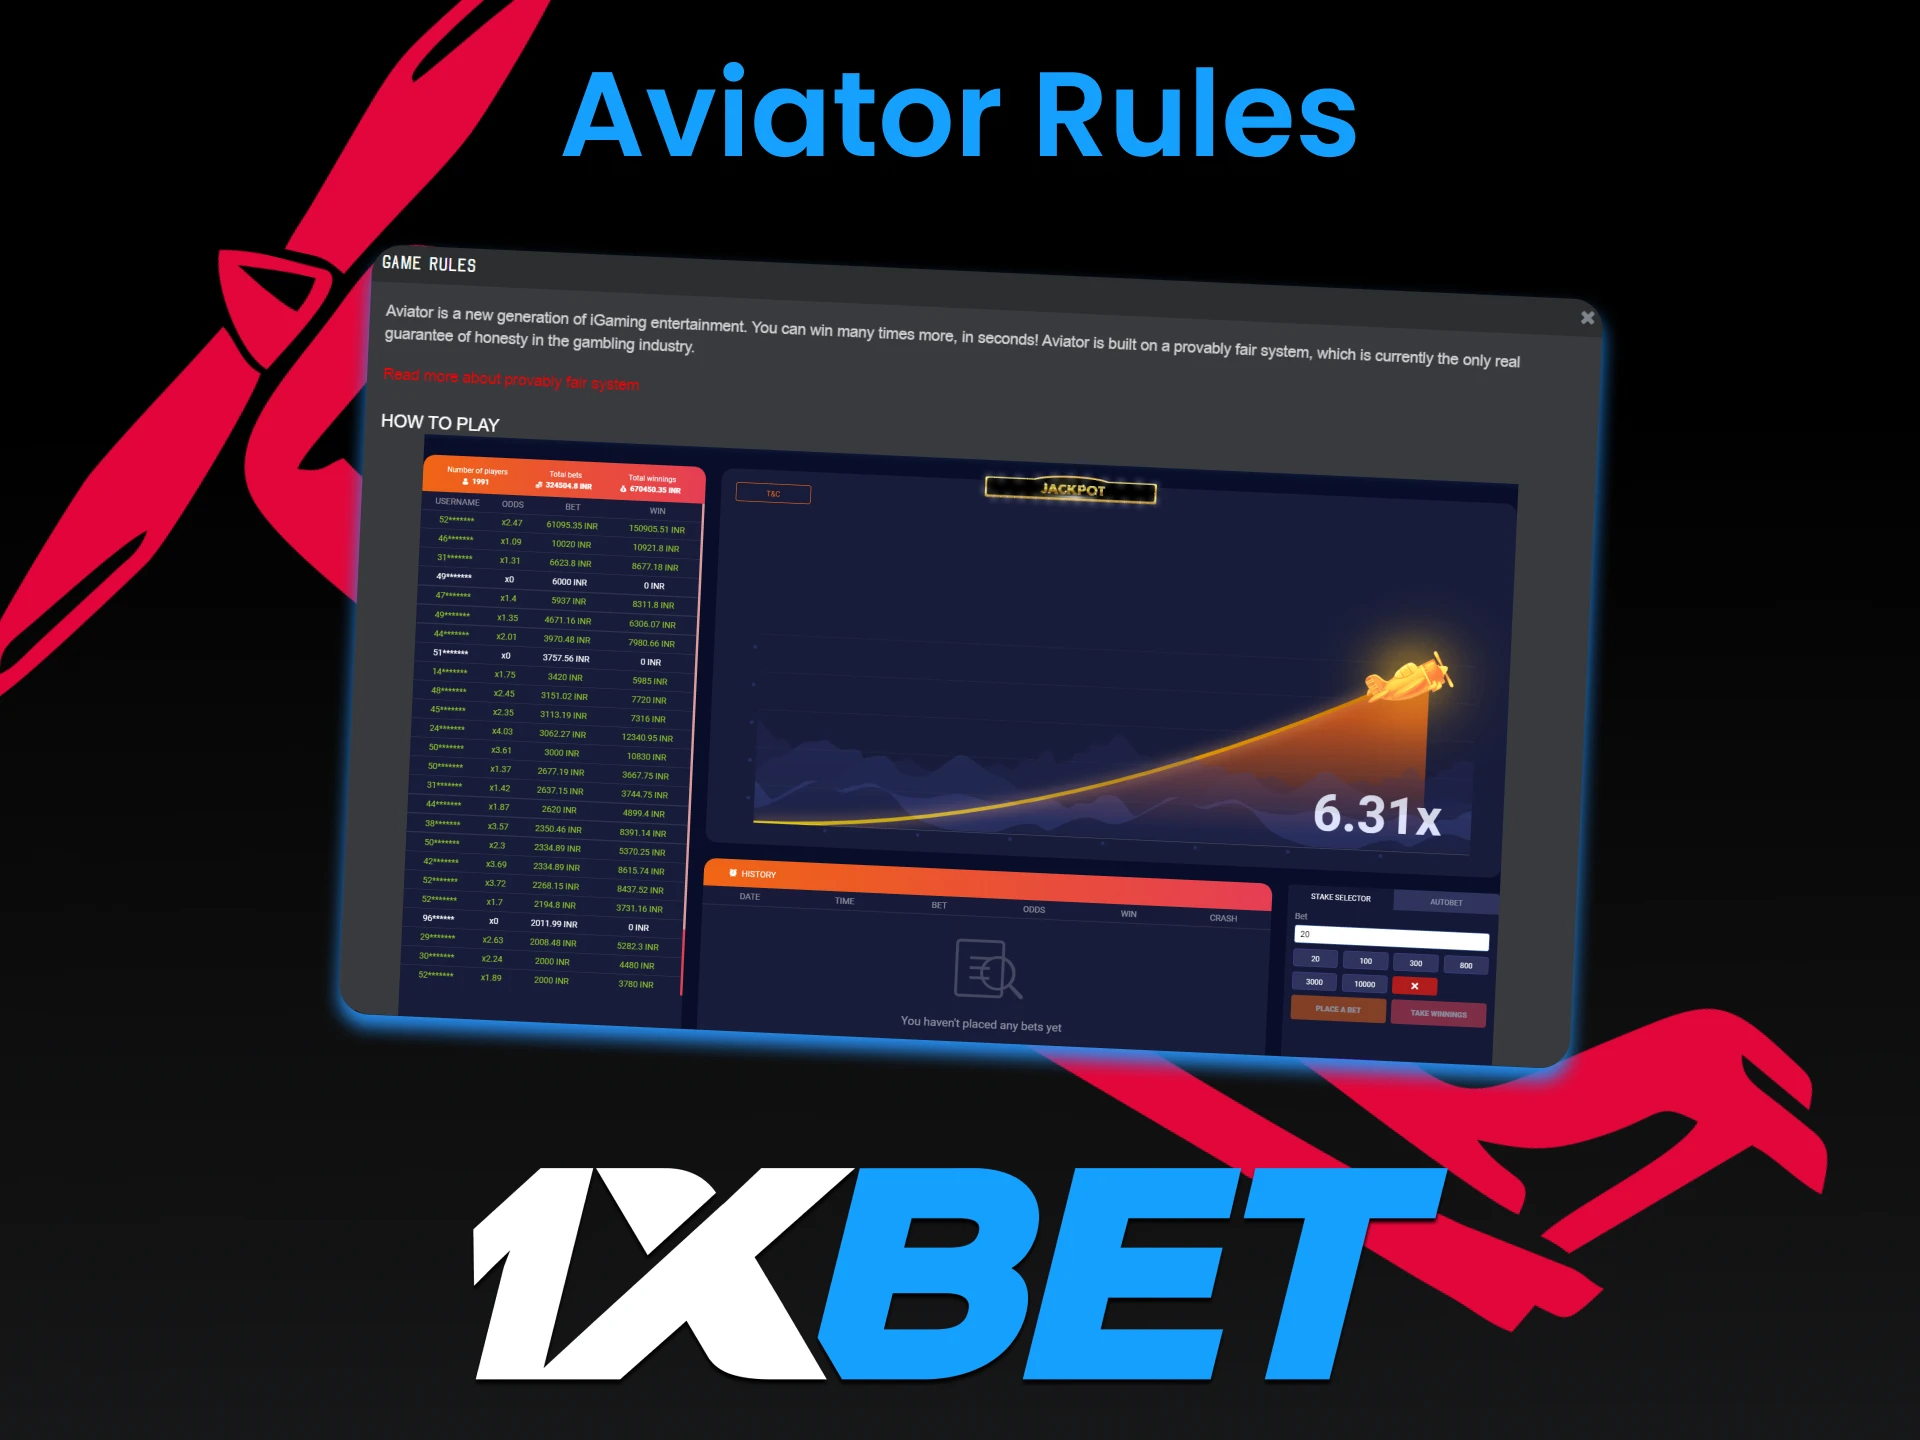 To win, learn the rules of the game in Aviator from 1xbet.